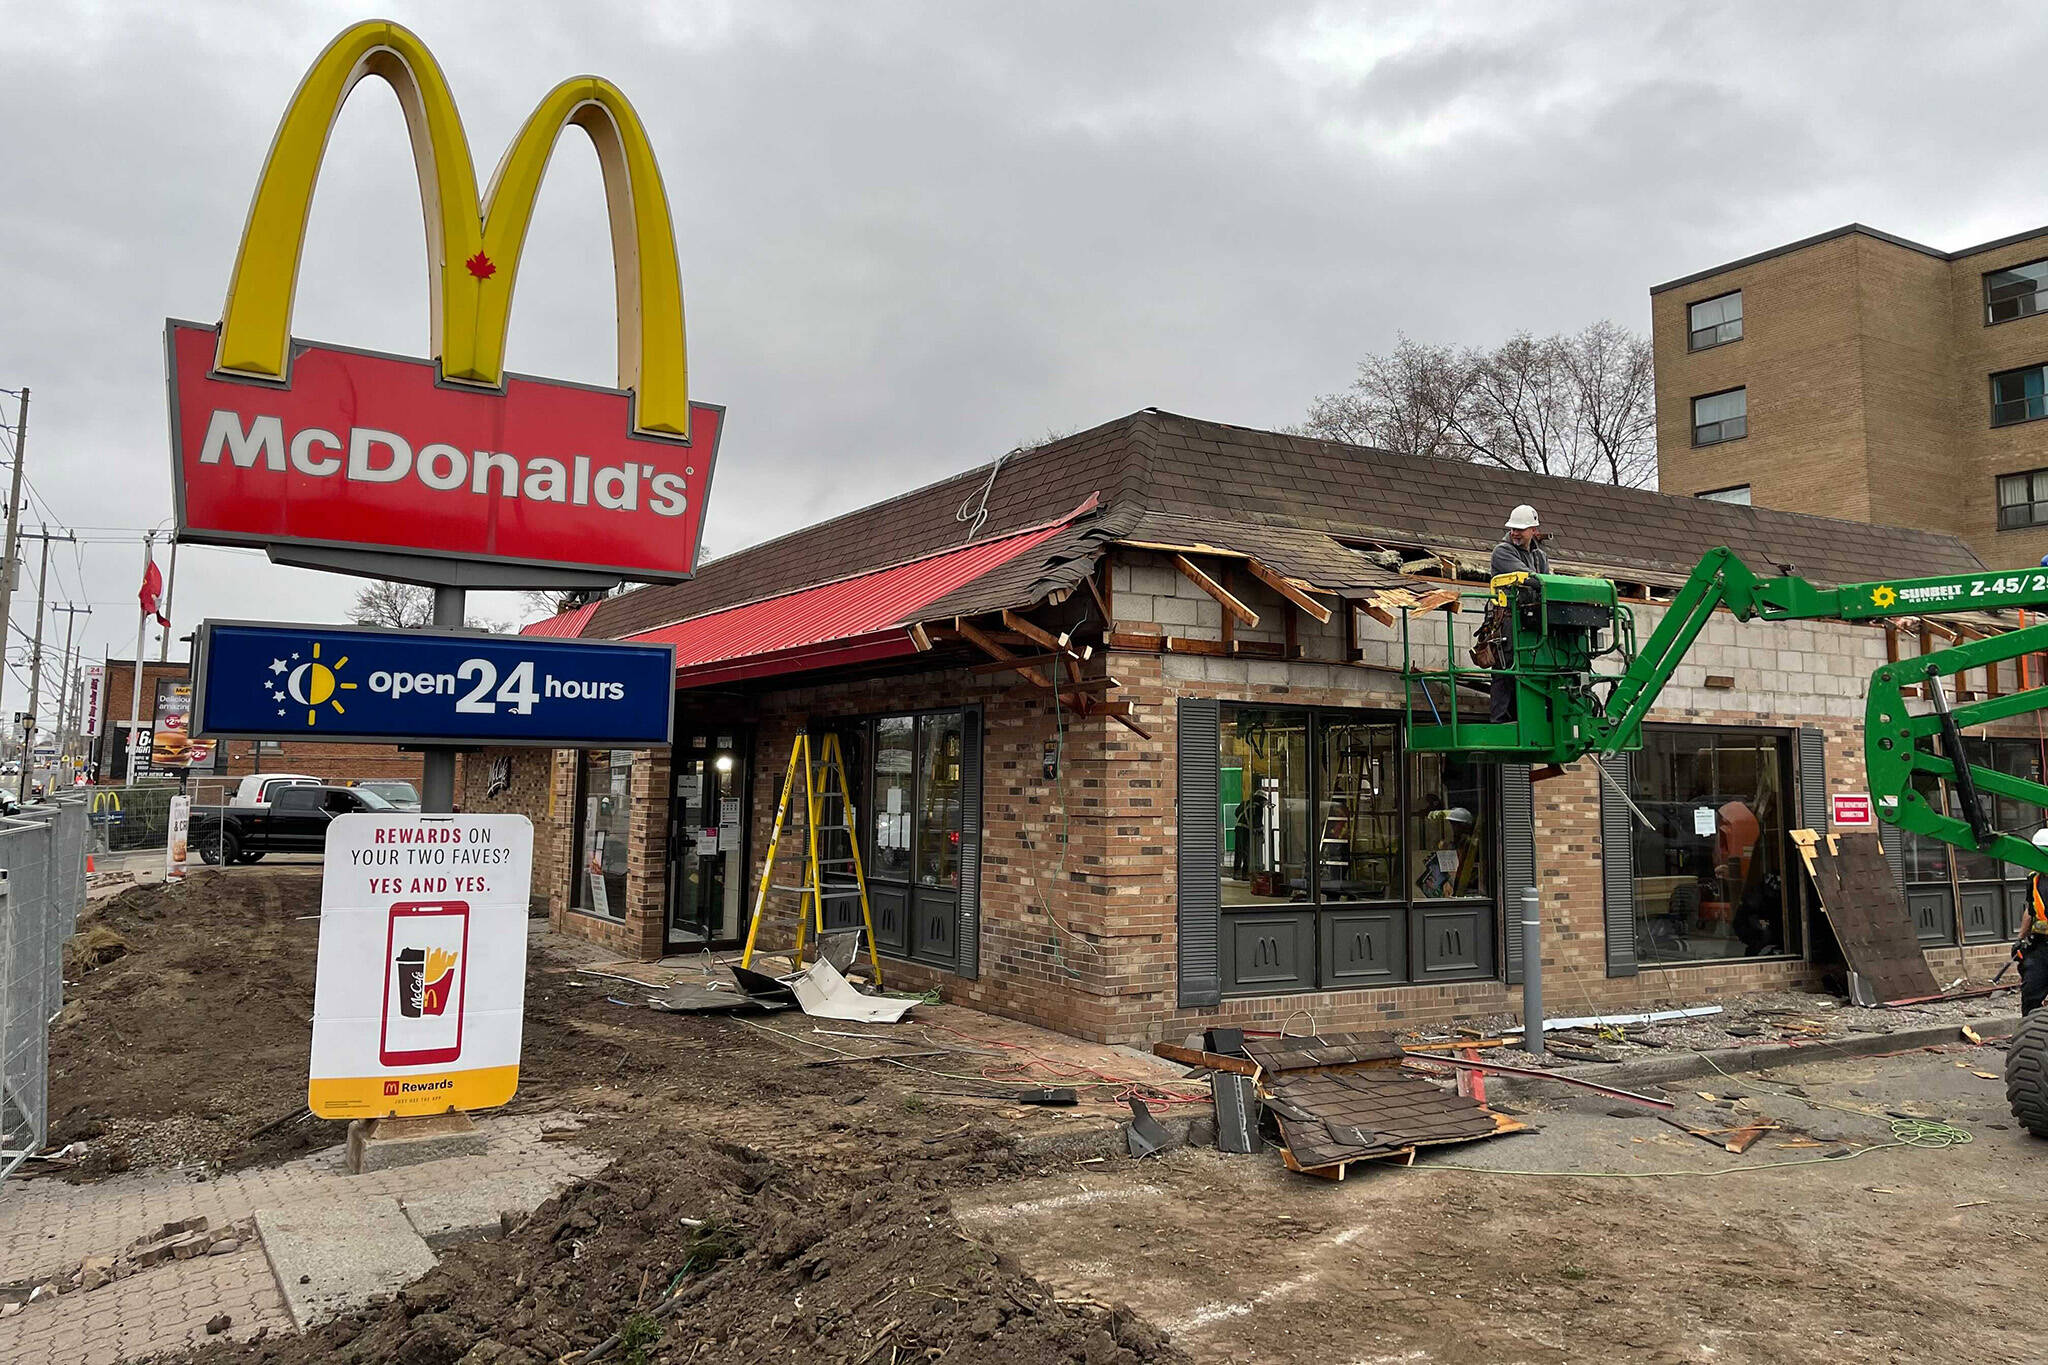 Toronto McDonald's just closed for major renovations and the